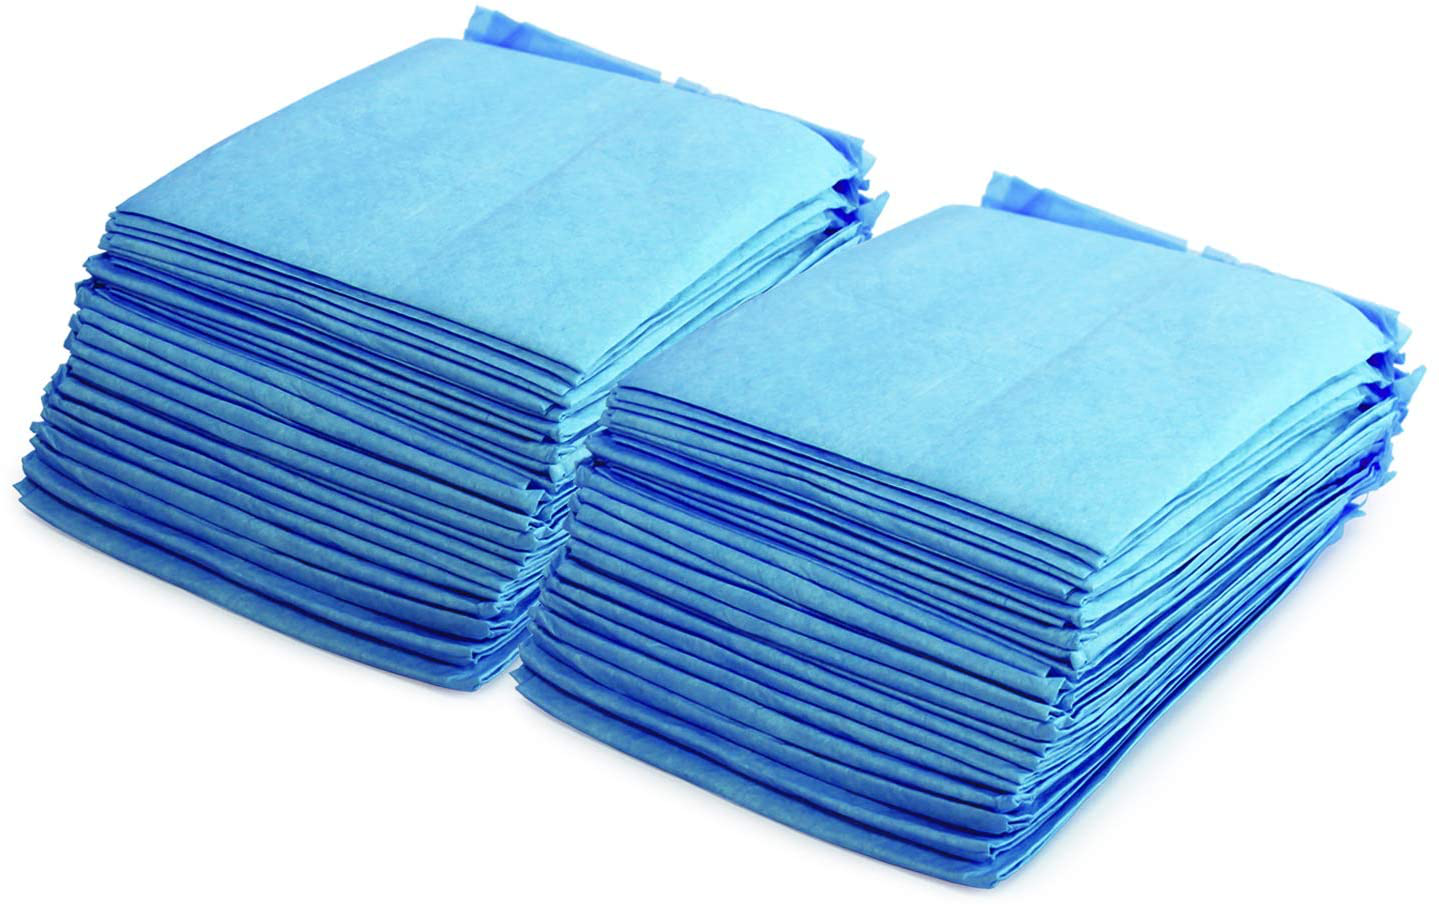 40 XL 36 x 36 Heavy Duty Ultra Absorbent Bed Pads w/ Adhesive by Nurture |  Disposable Chux Liners, Underpads, Adult Incontinence Hospital Grade Chucks